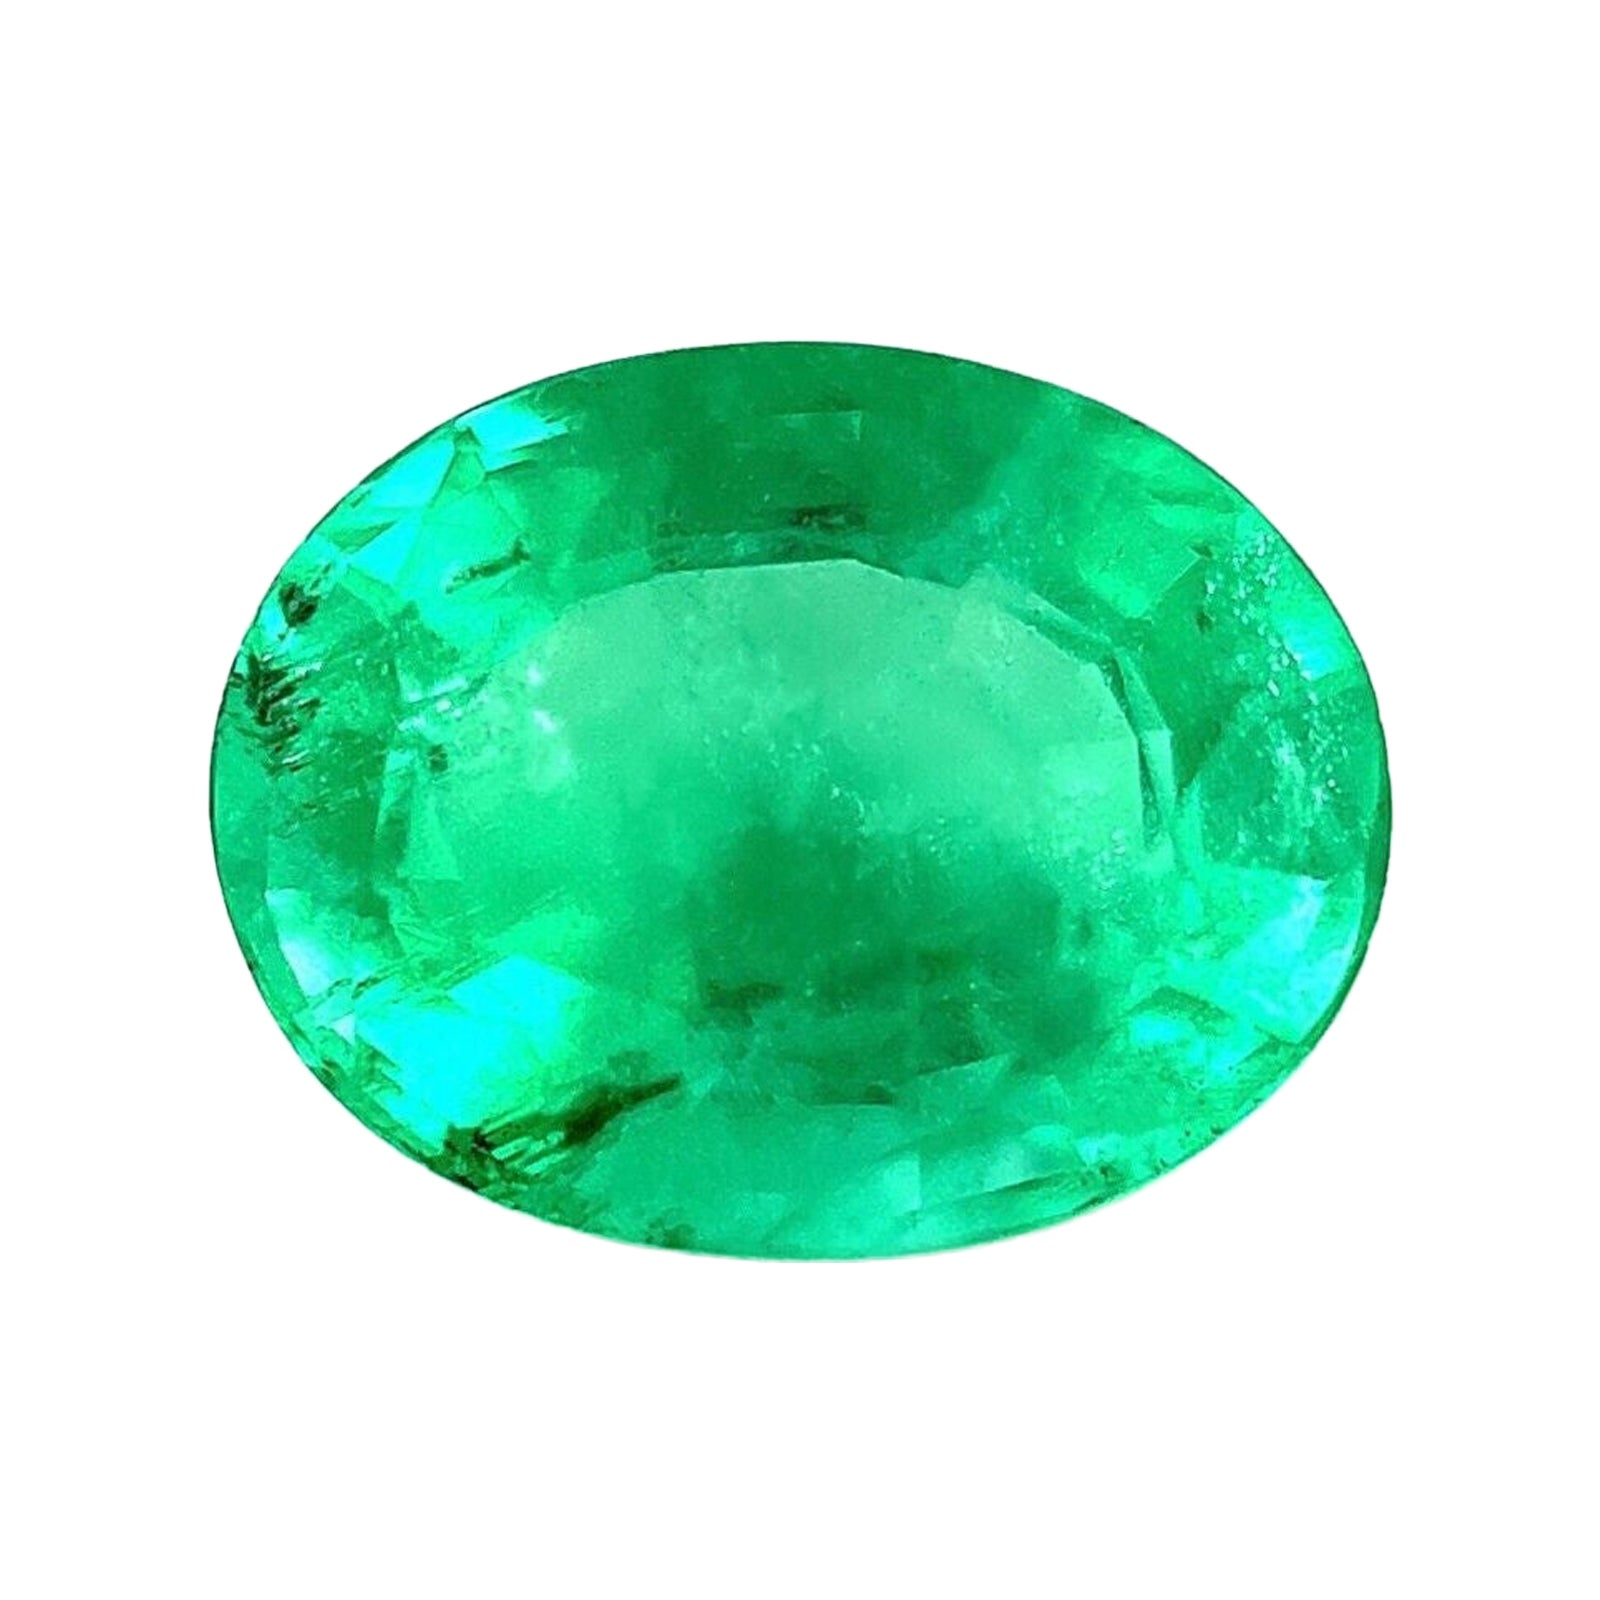 Natural 1.85Ct Emerald Rare Vivid Green Oval Cut Loose Gemstone For Sale